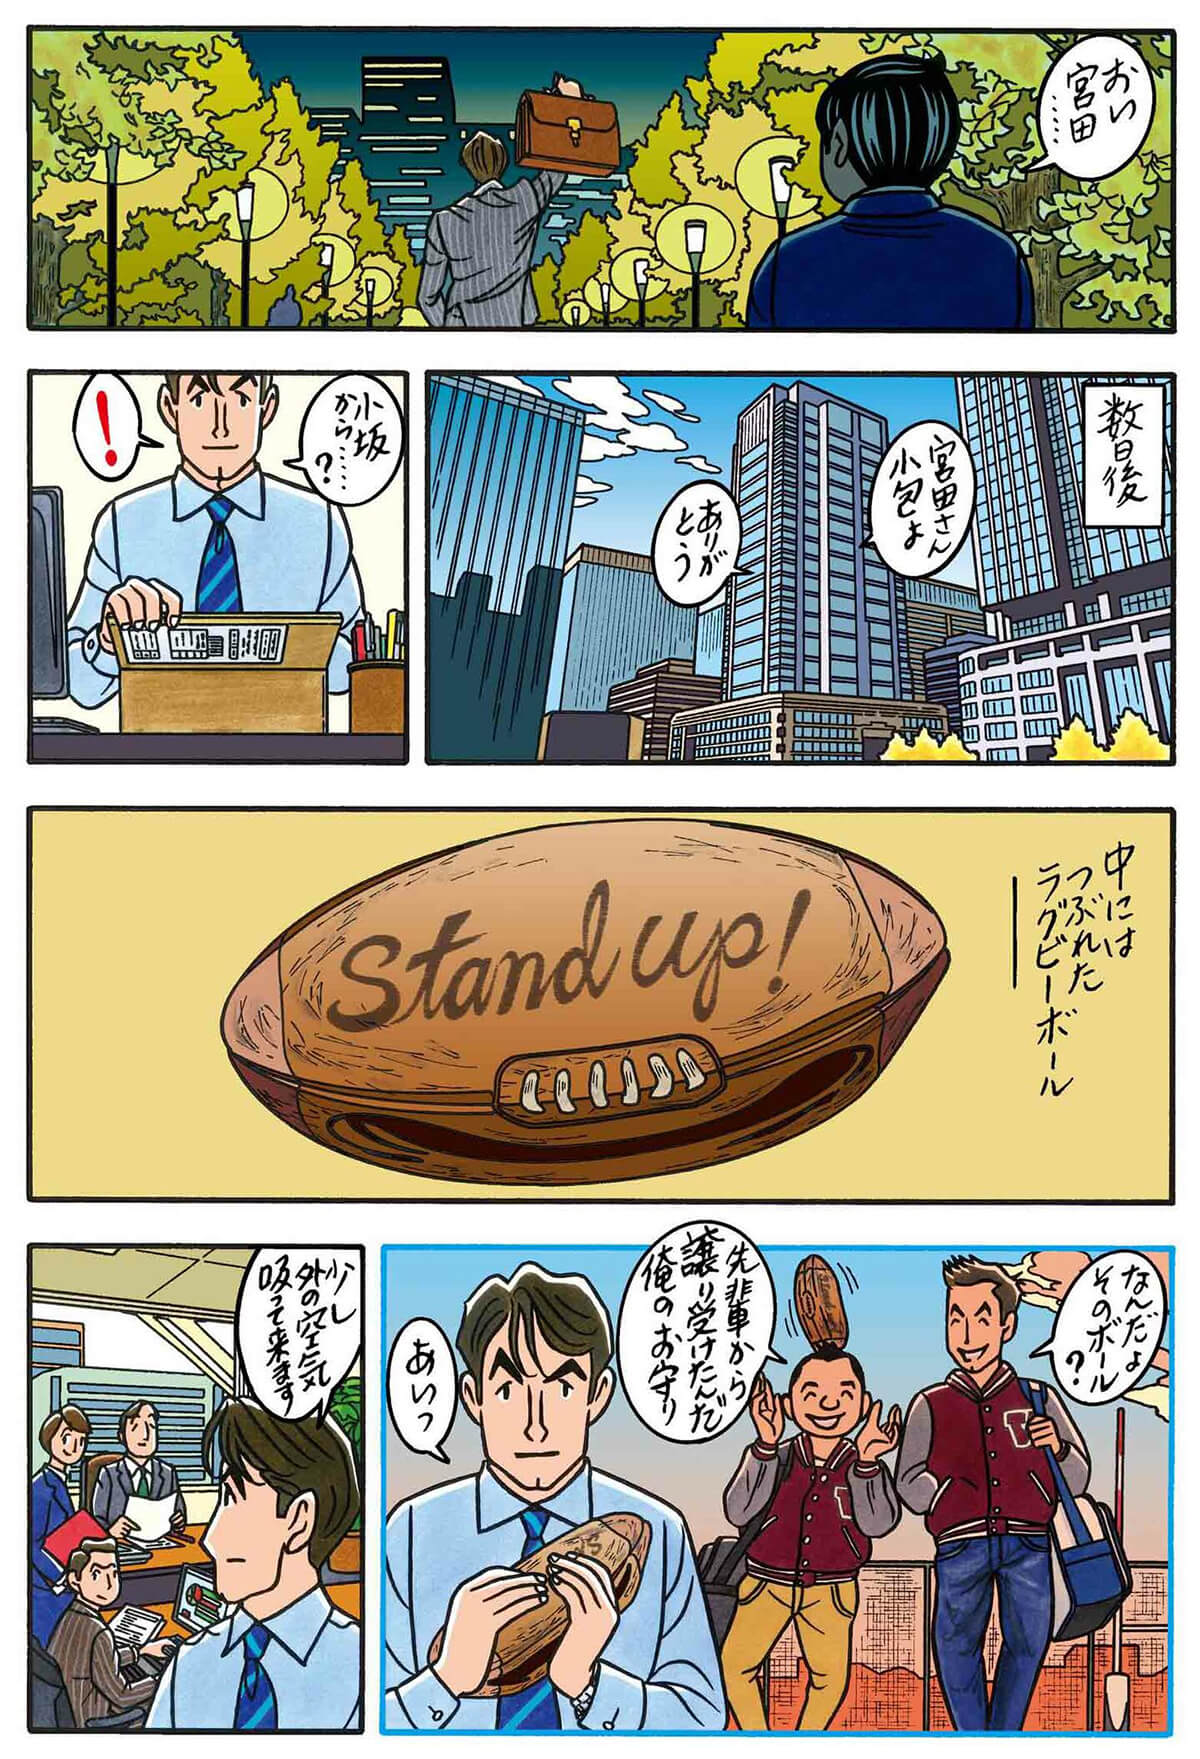 vol.19『stand up!』6/8の画像